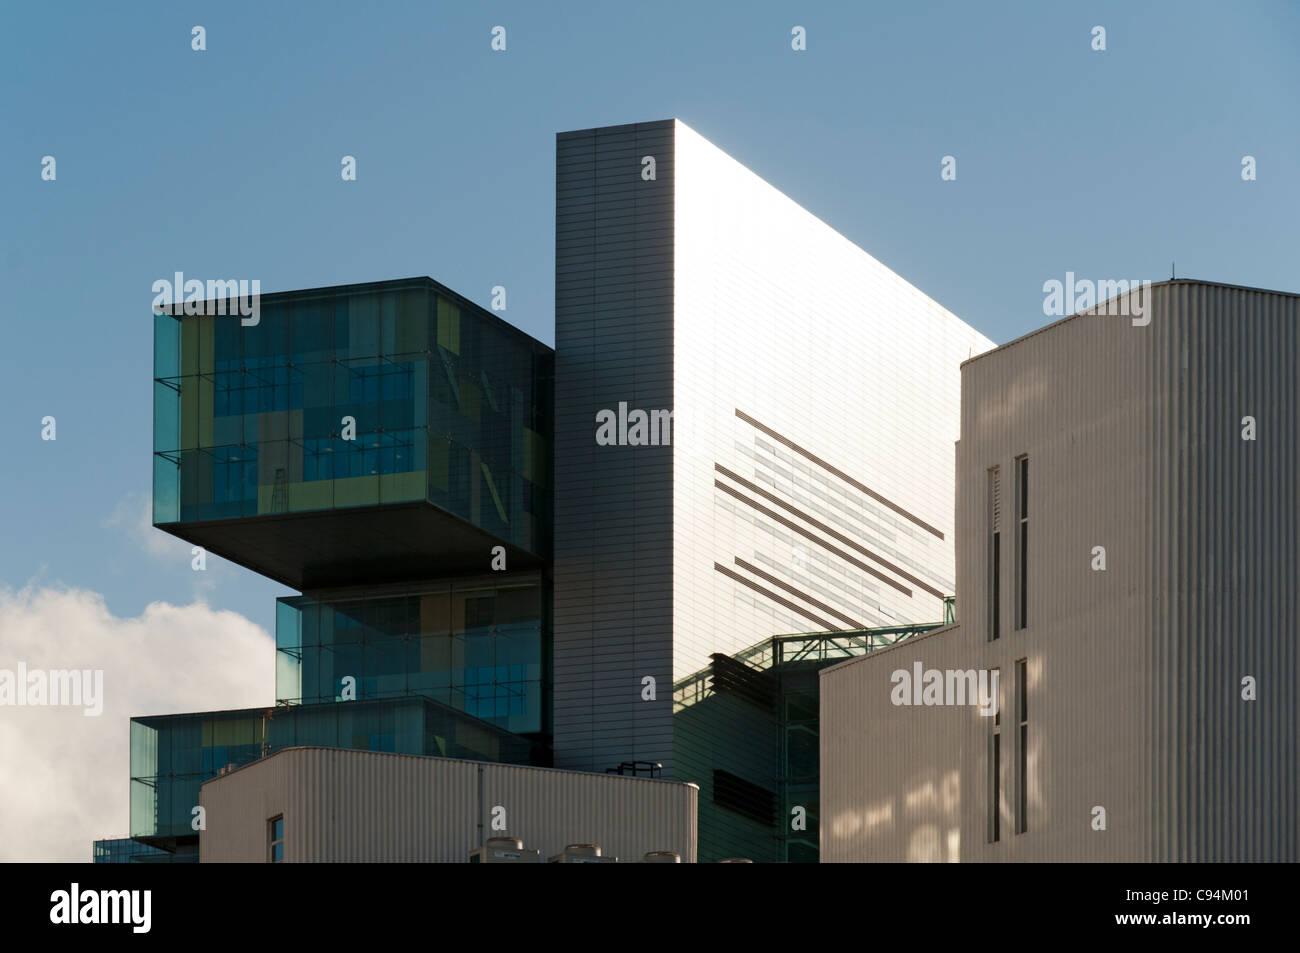 The Civil Justice Centre building, Spinningfields, Manchester, England, UK.  Nicknamed the Filing Cabinet building. Stock Photo